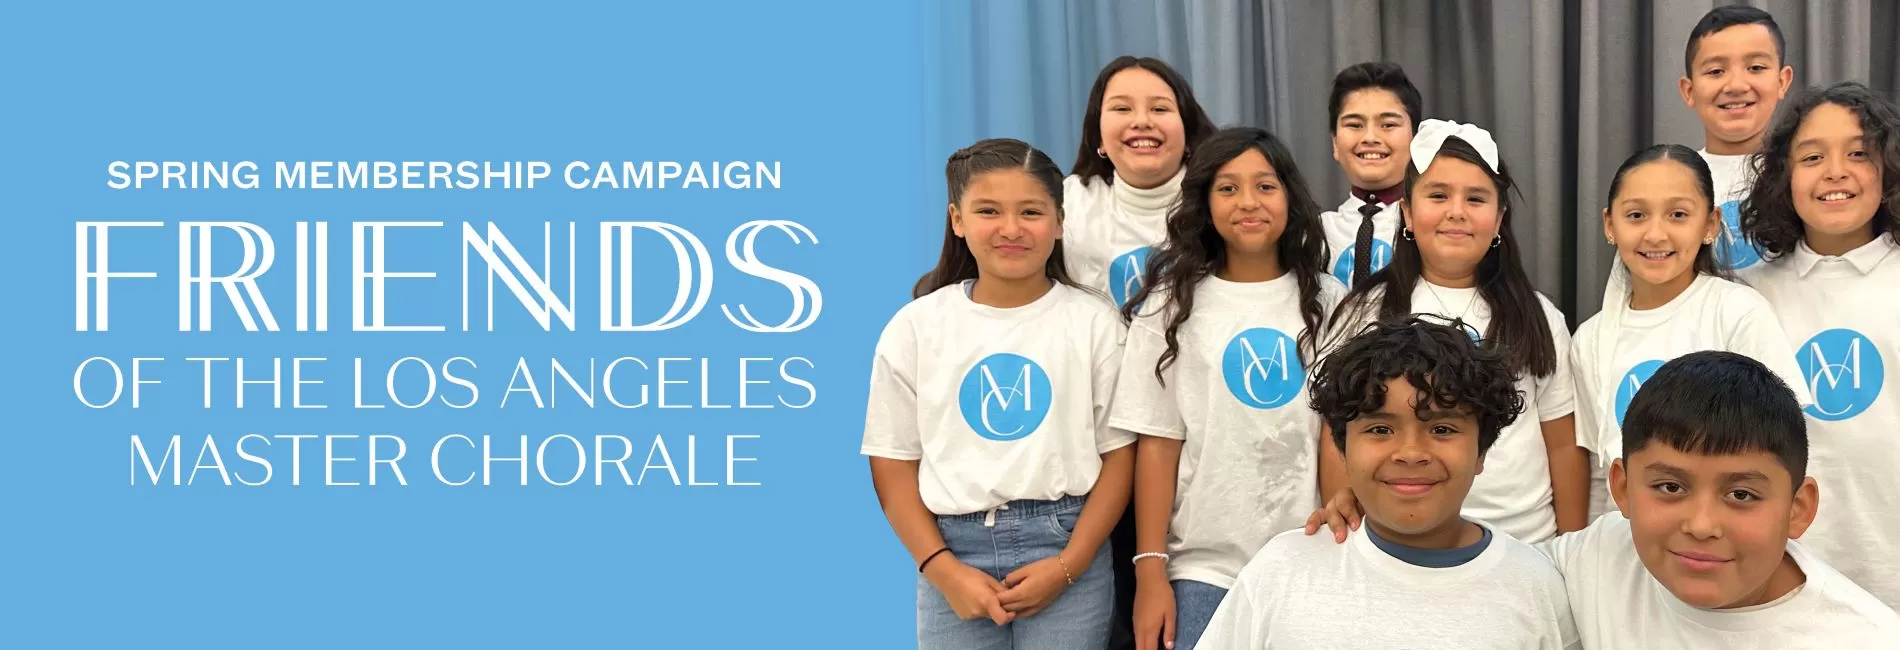 Spring Membership Campaign - Friends of the Los Angeles Master Chorale